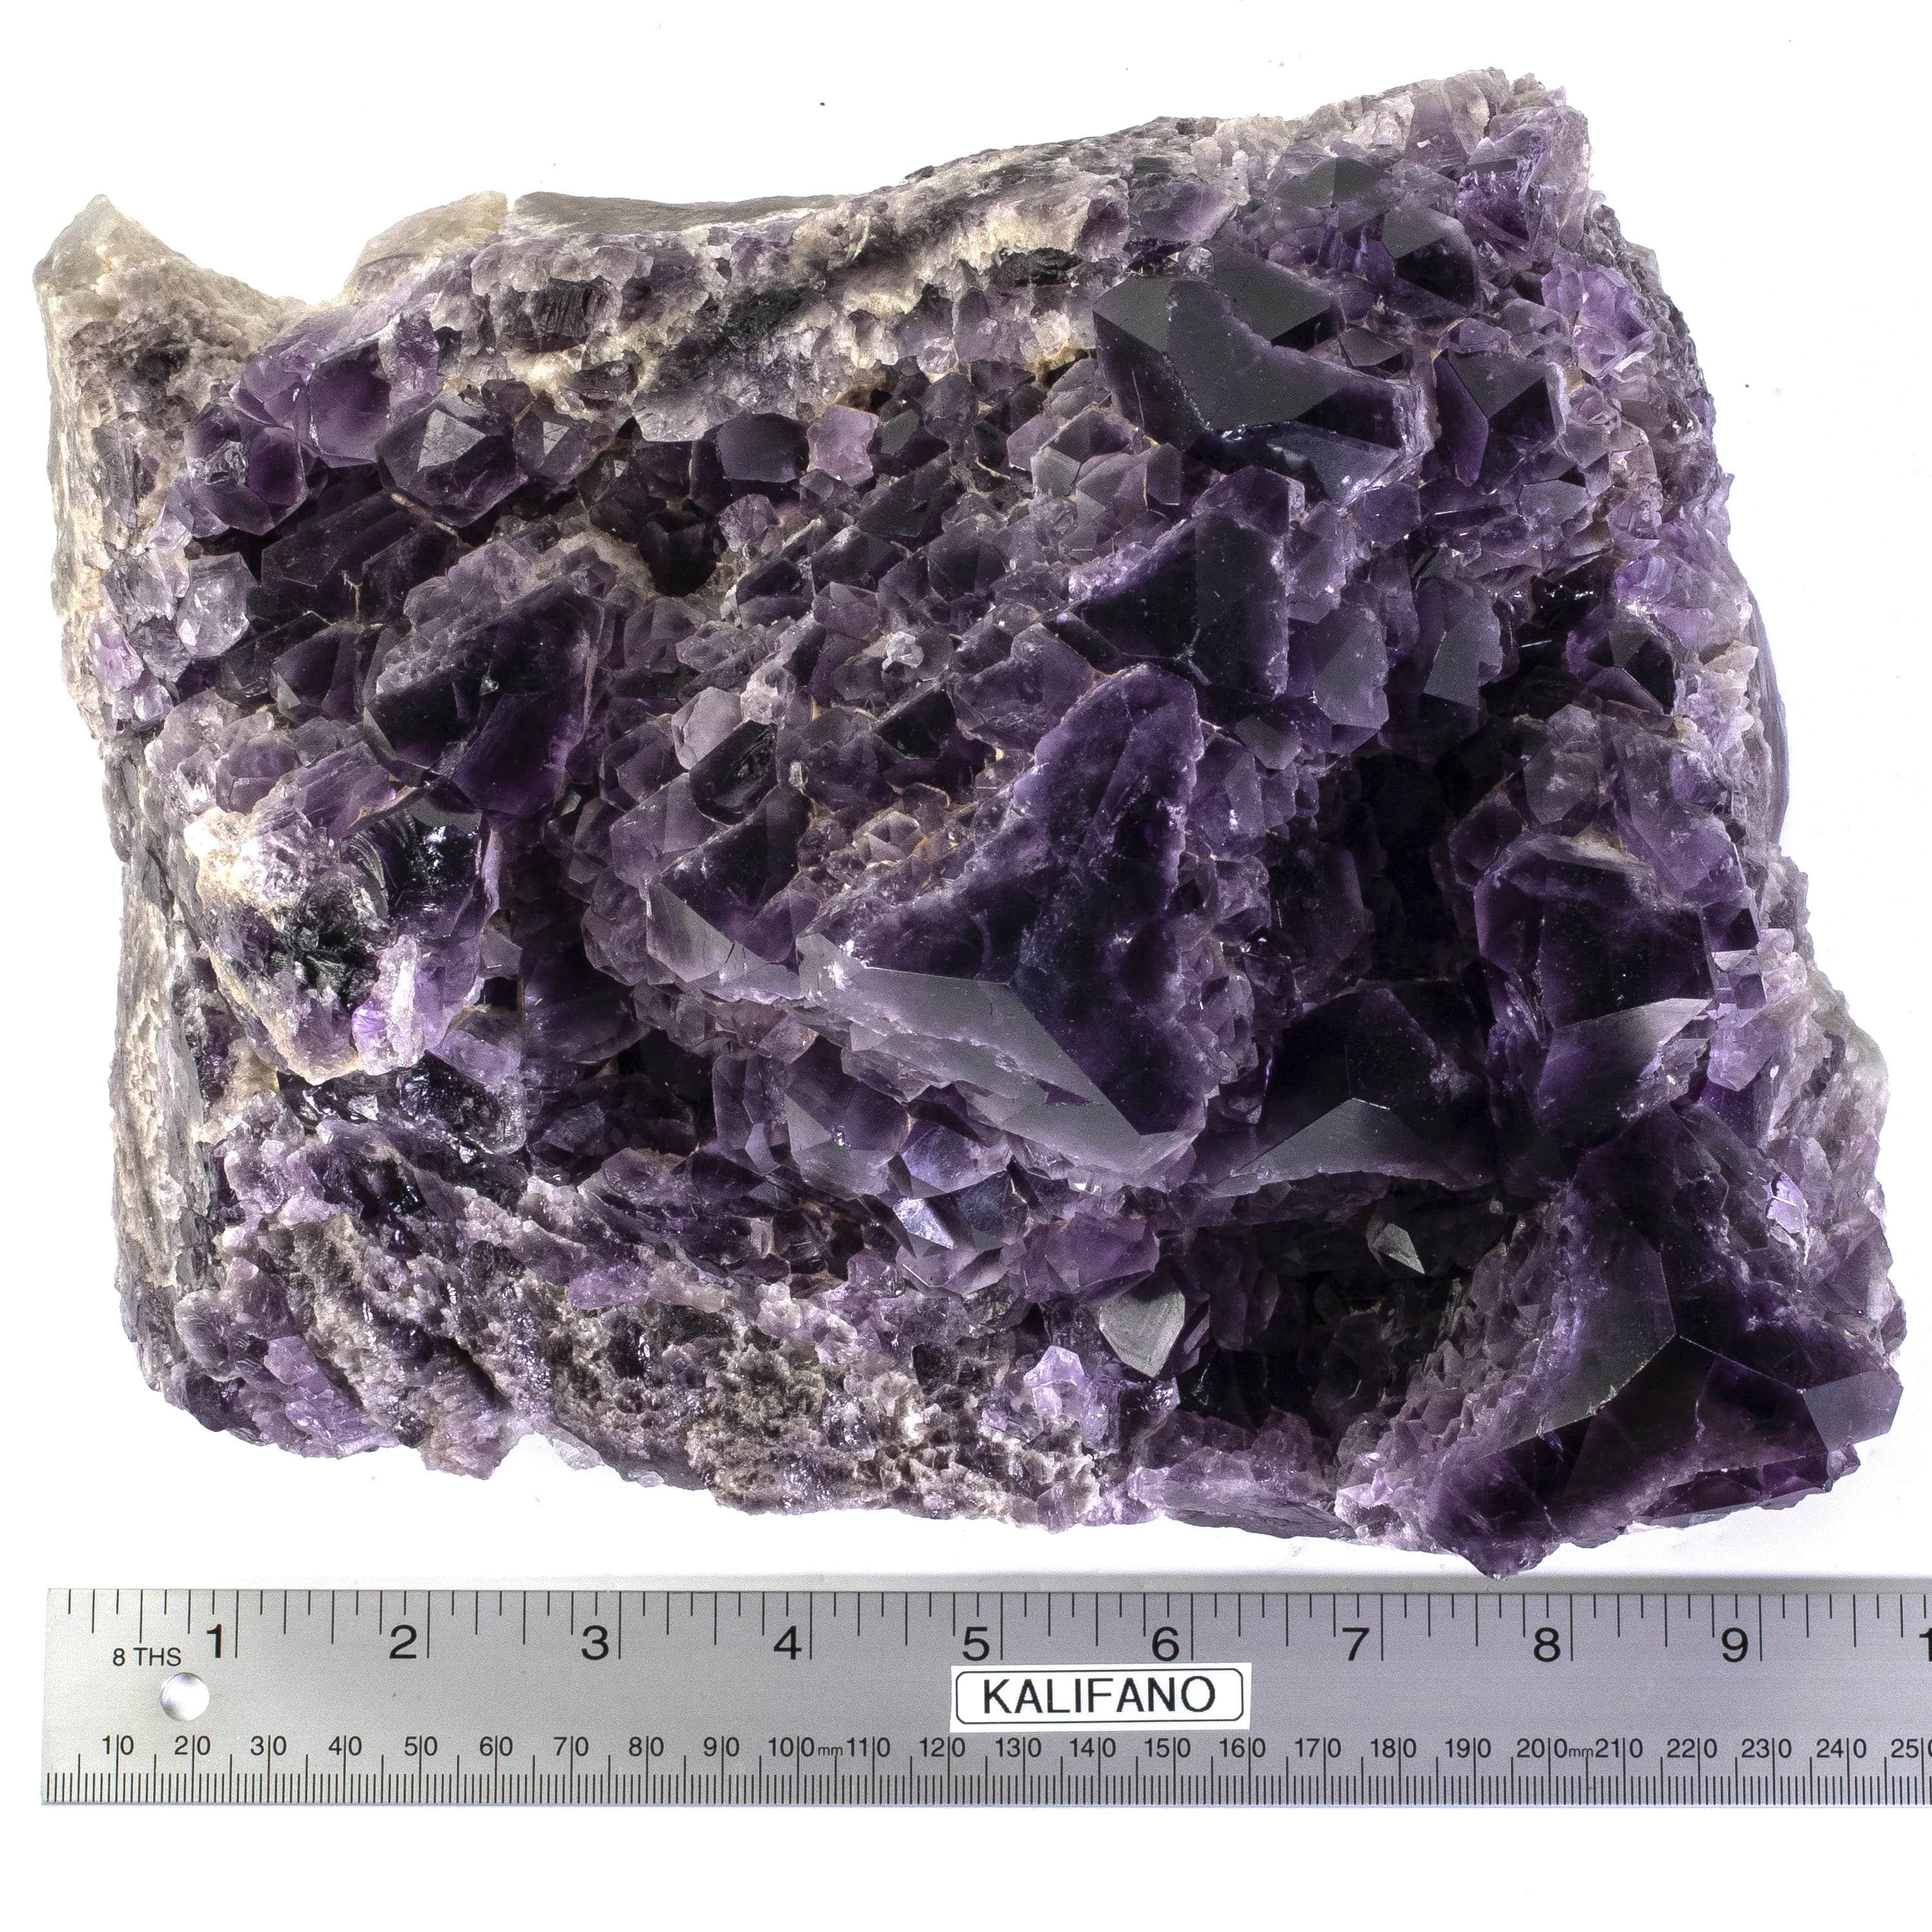 Kalifano Amethyst Rare Natural Elestial Amethyst Cluster Point from Brazil - 20.2 lbs ALW3400.001